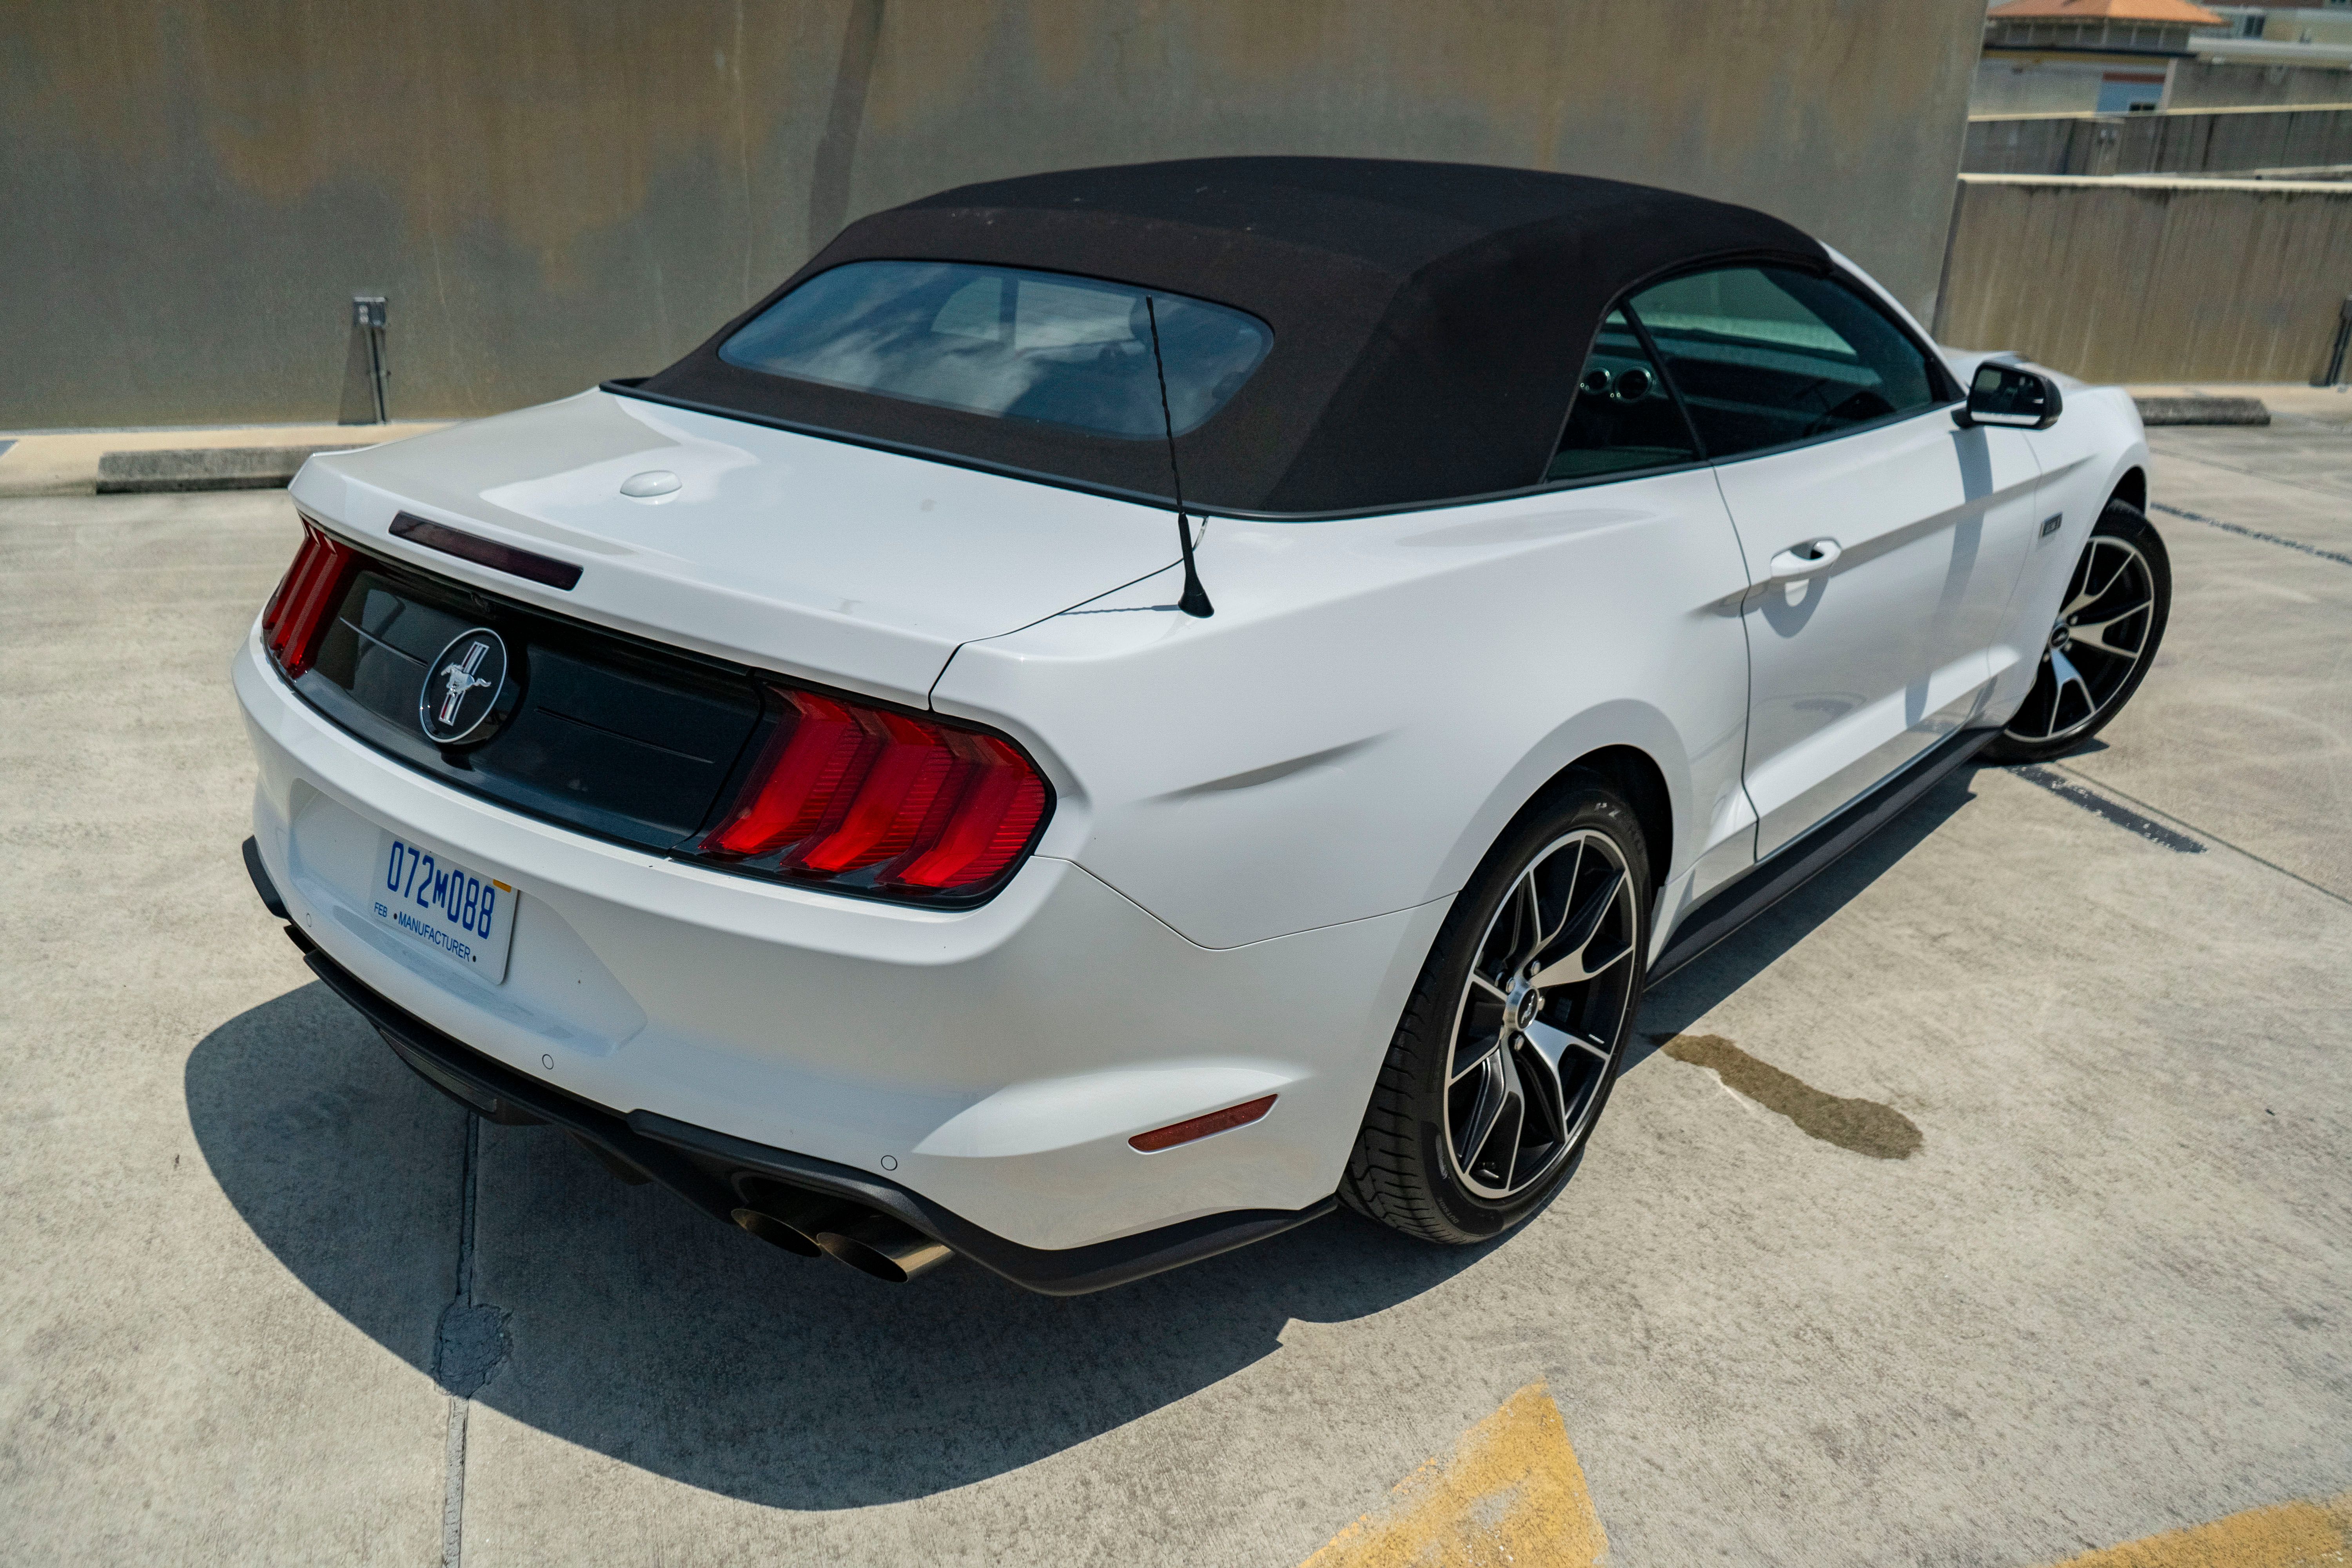 2020 Ford Mustang Four-Cylinder - Driven